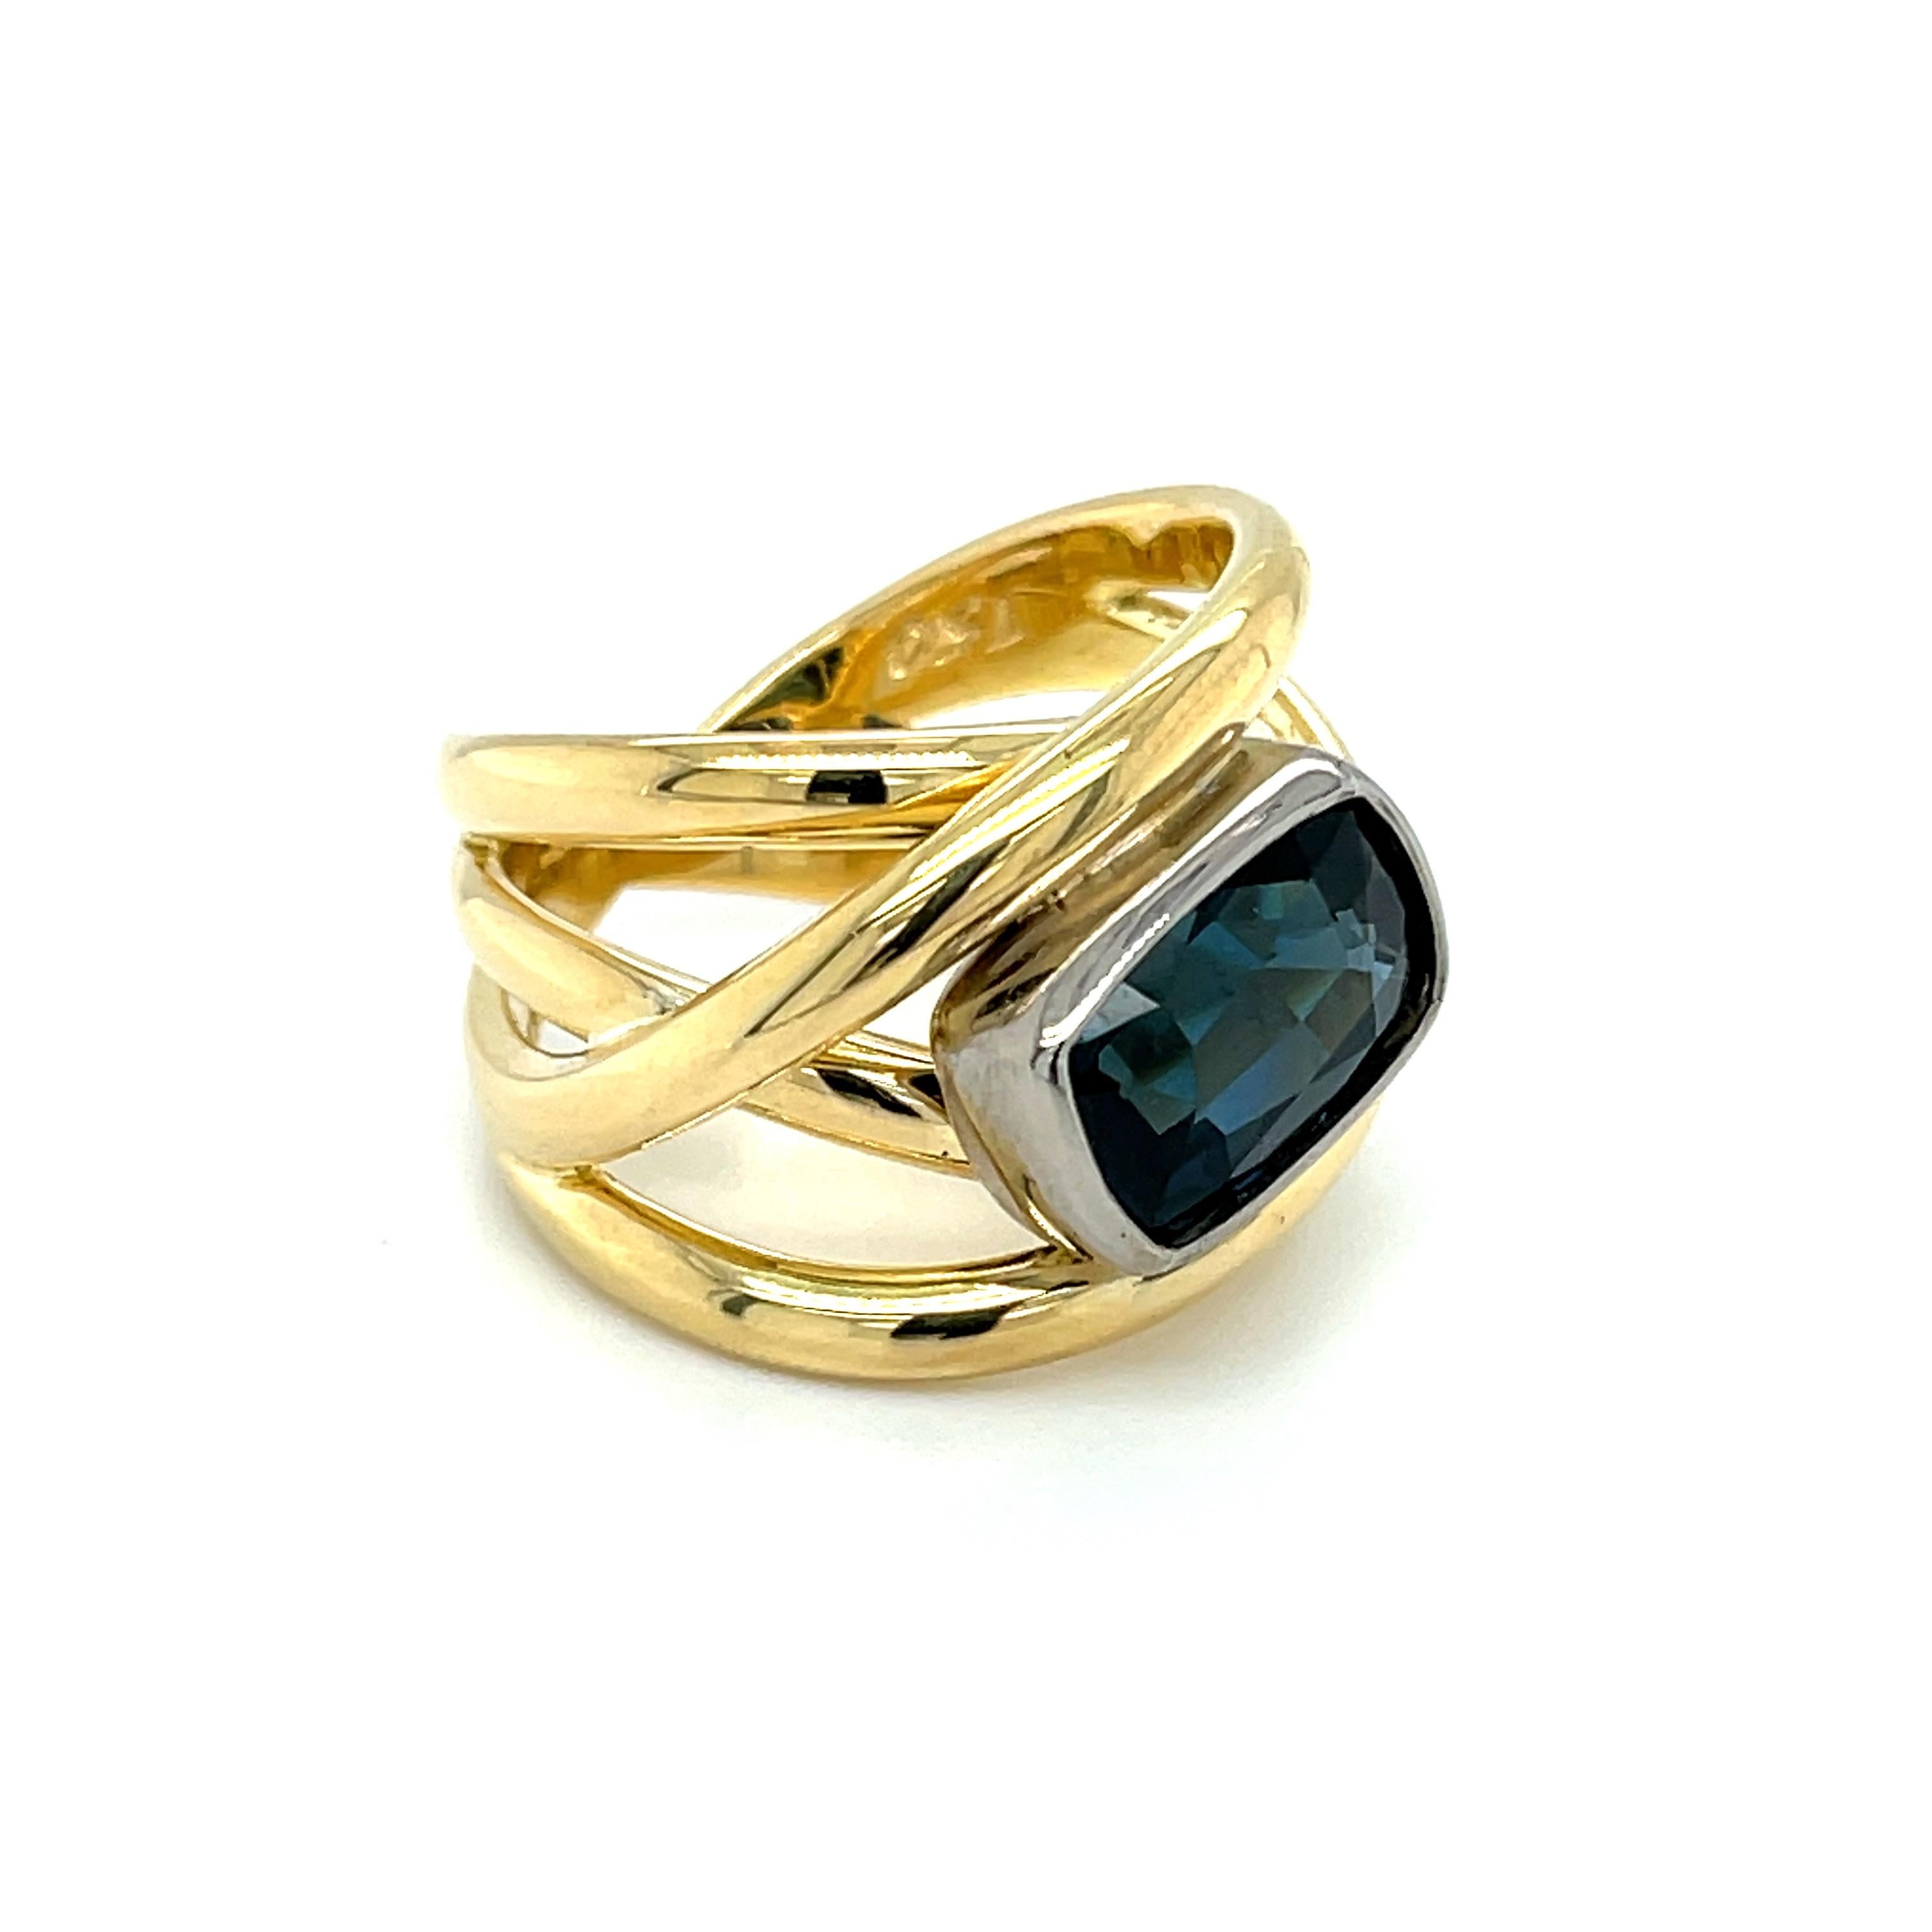 4.07 Carat Blue Spinel and 18k Gold Ring   In New Condition For Sale In Los Angeles, CA